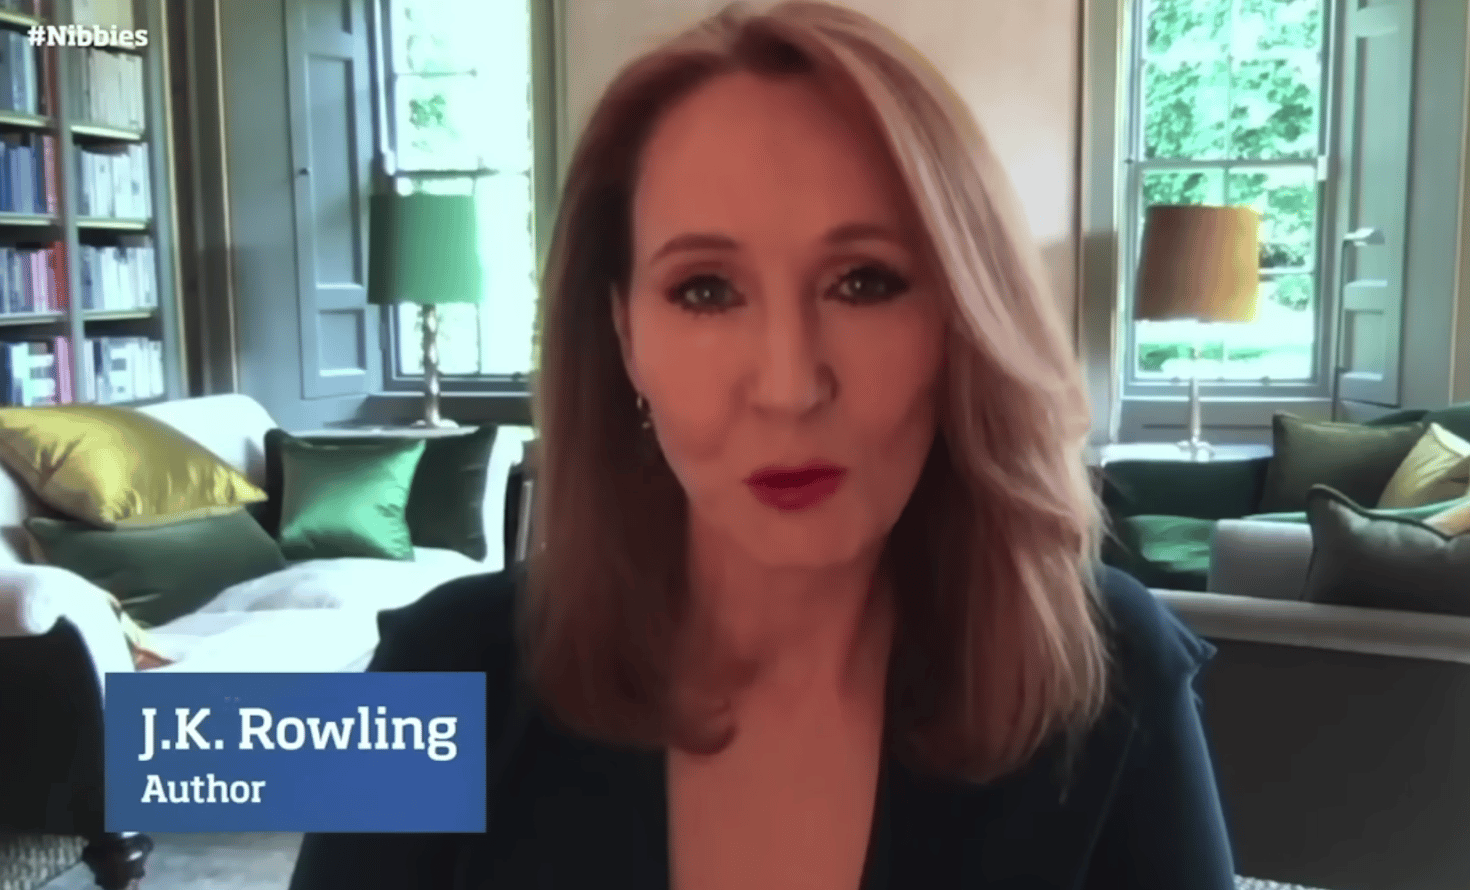 JK Rowling Says She Would ‘Happily Go To Jail’ For Her Transphobic Views